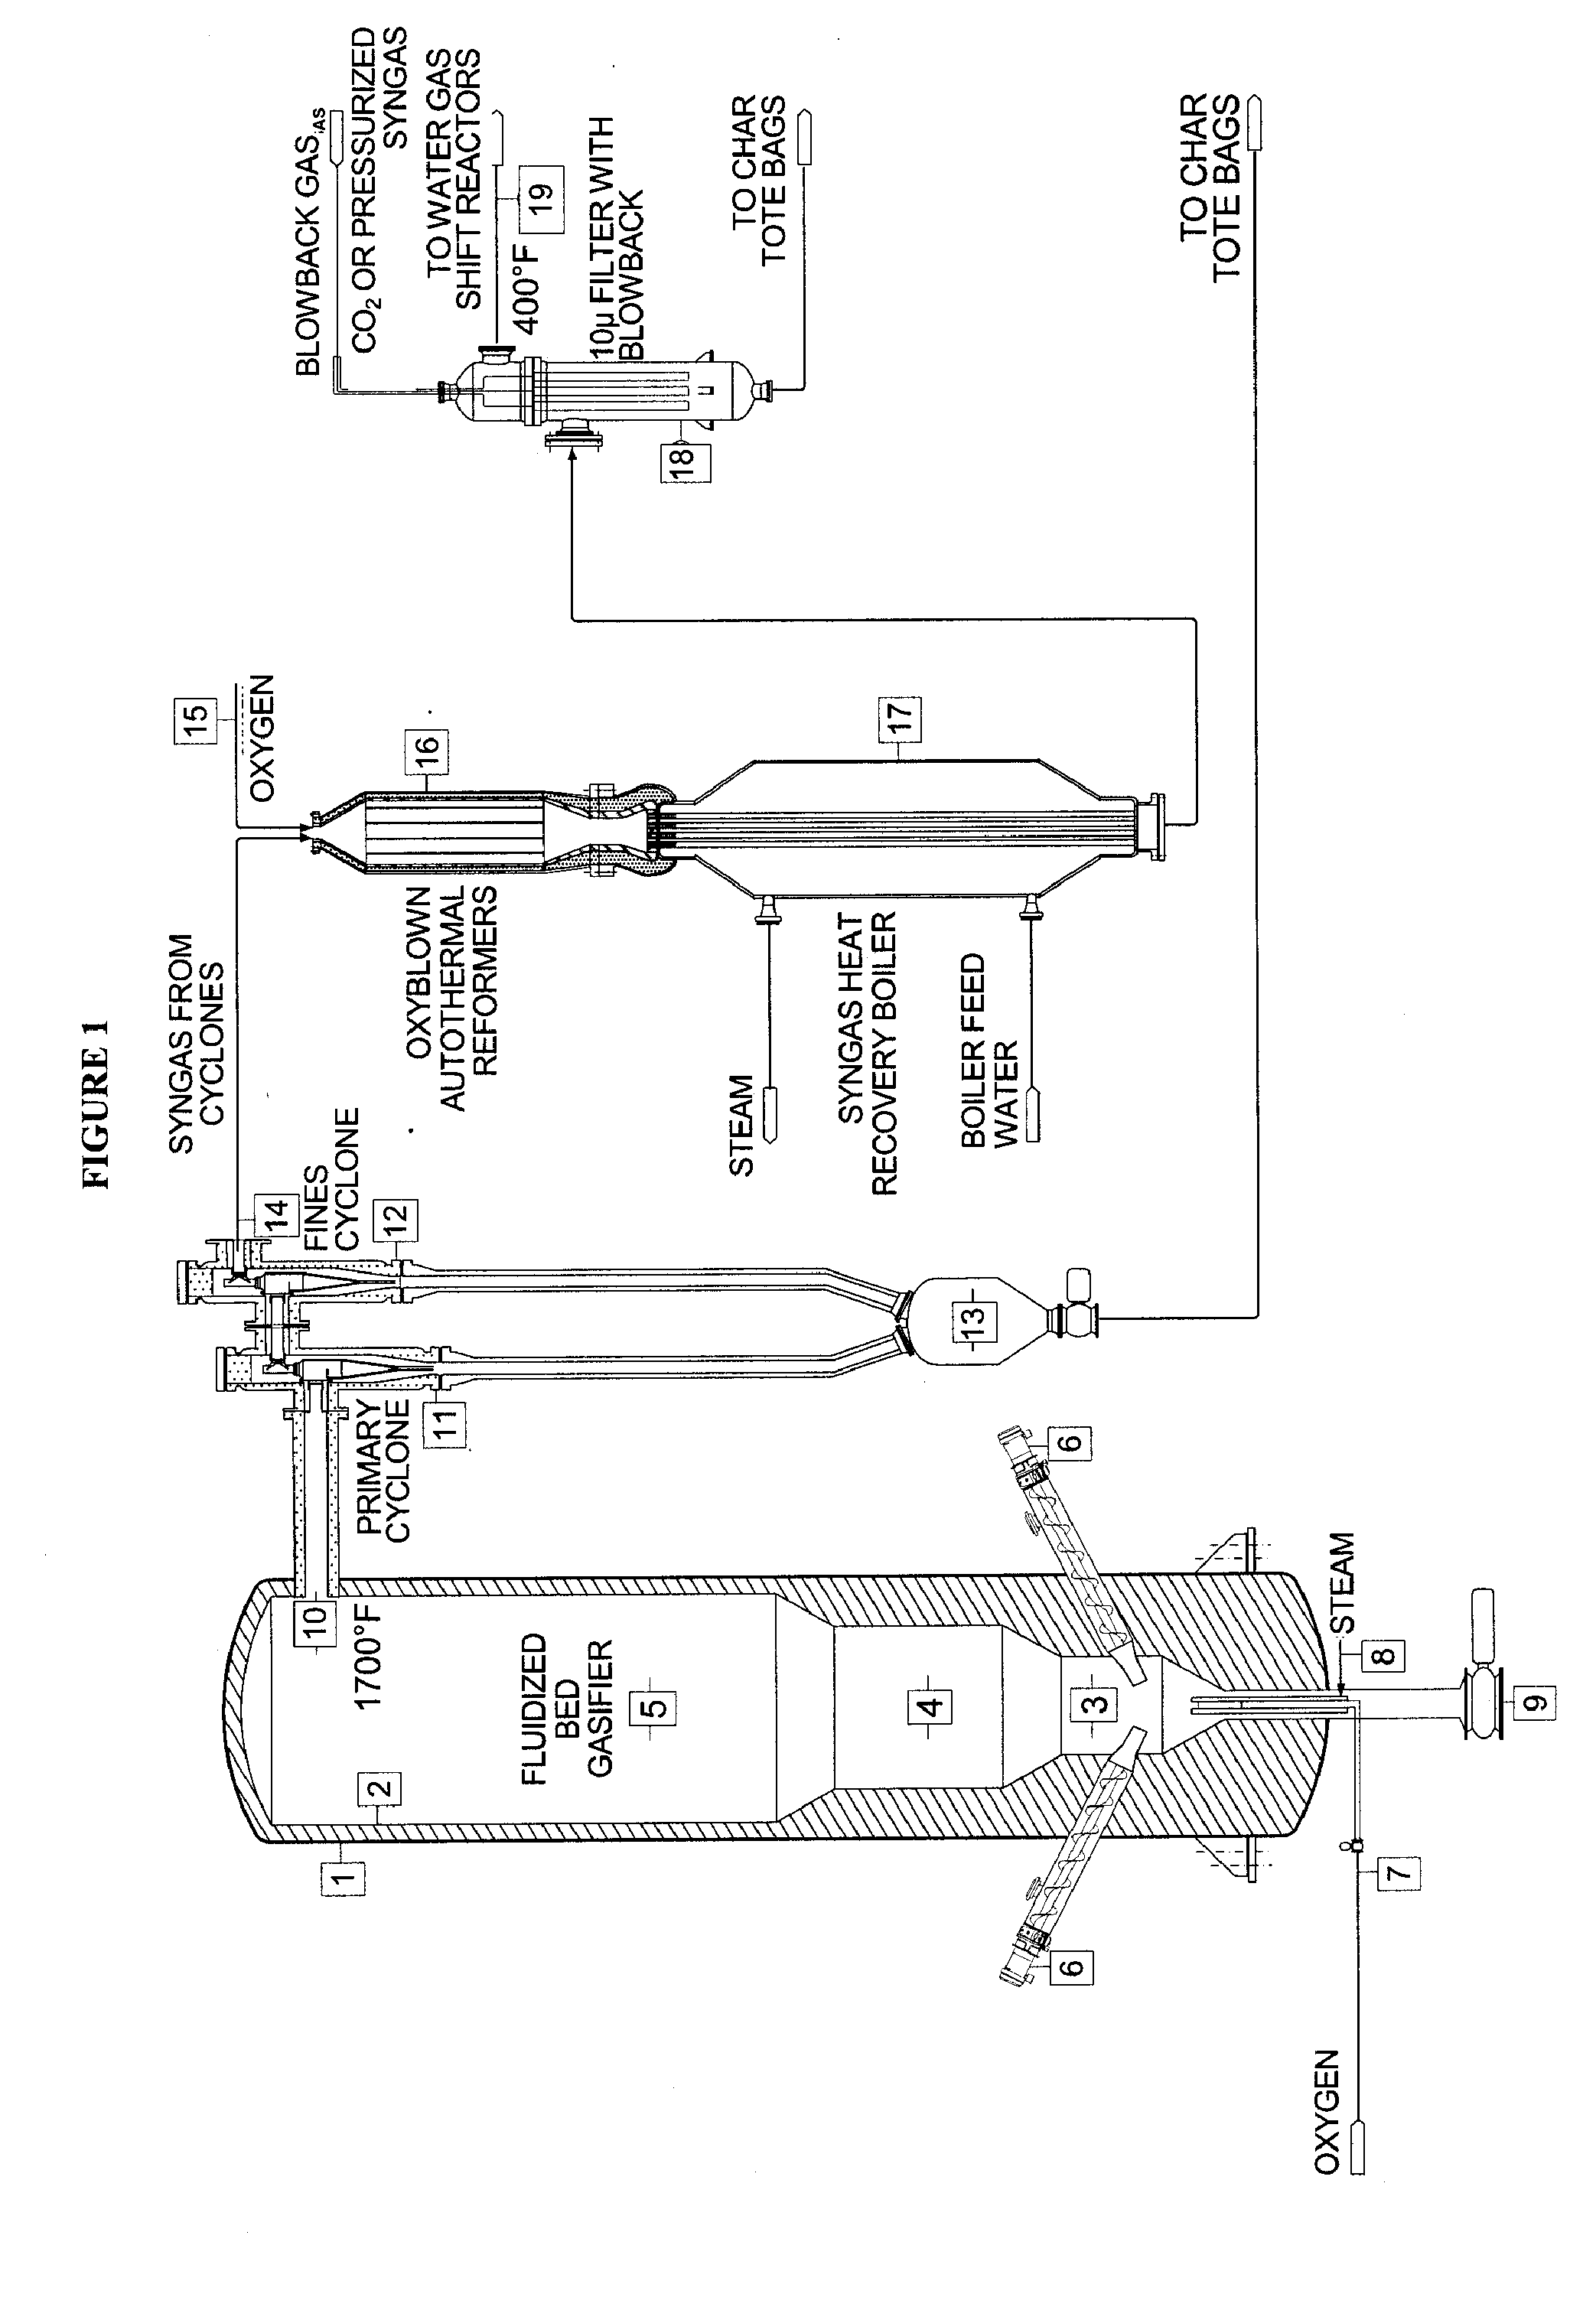 Method for converting biomass into synthesis gas using a pressurized multi-stage progressively expanding fluidized bed gasifier followed by an oxyblown autothermal reformer to reduce methane and tars